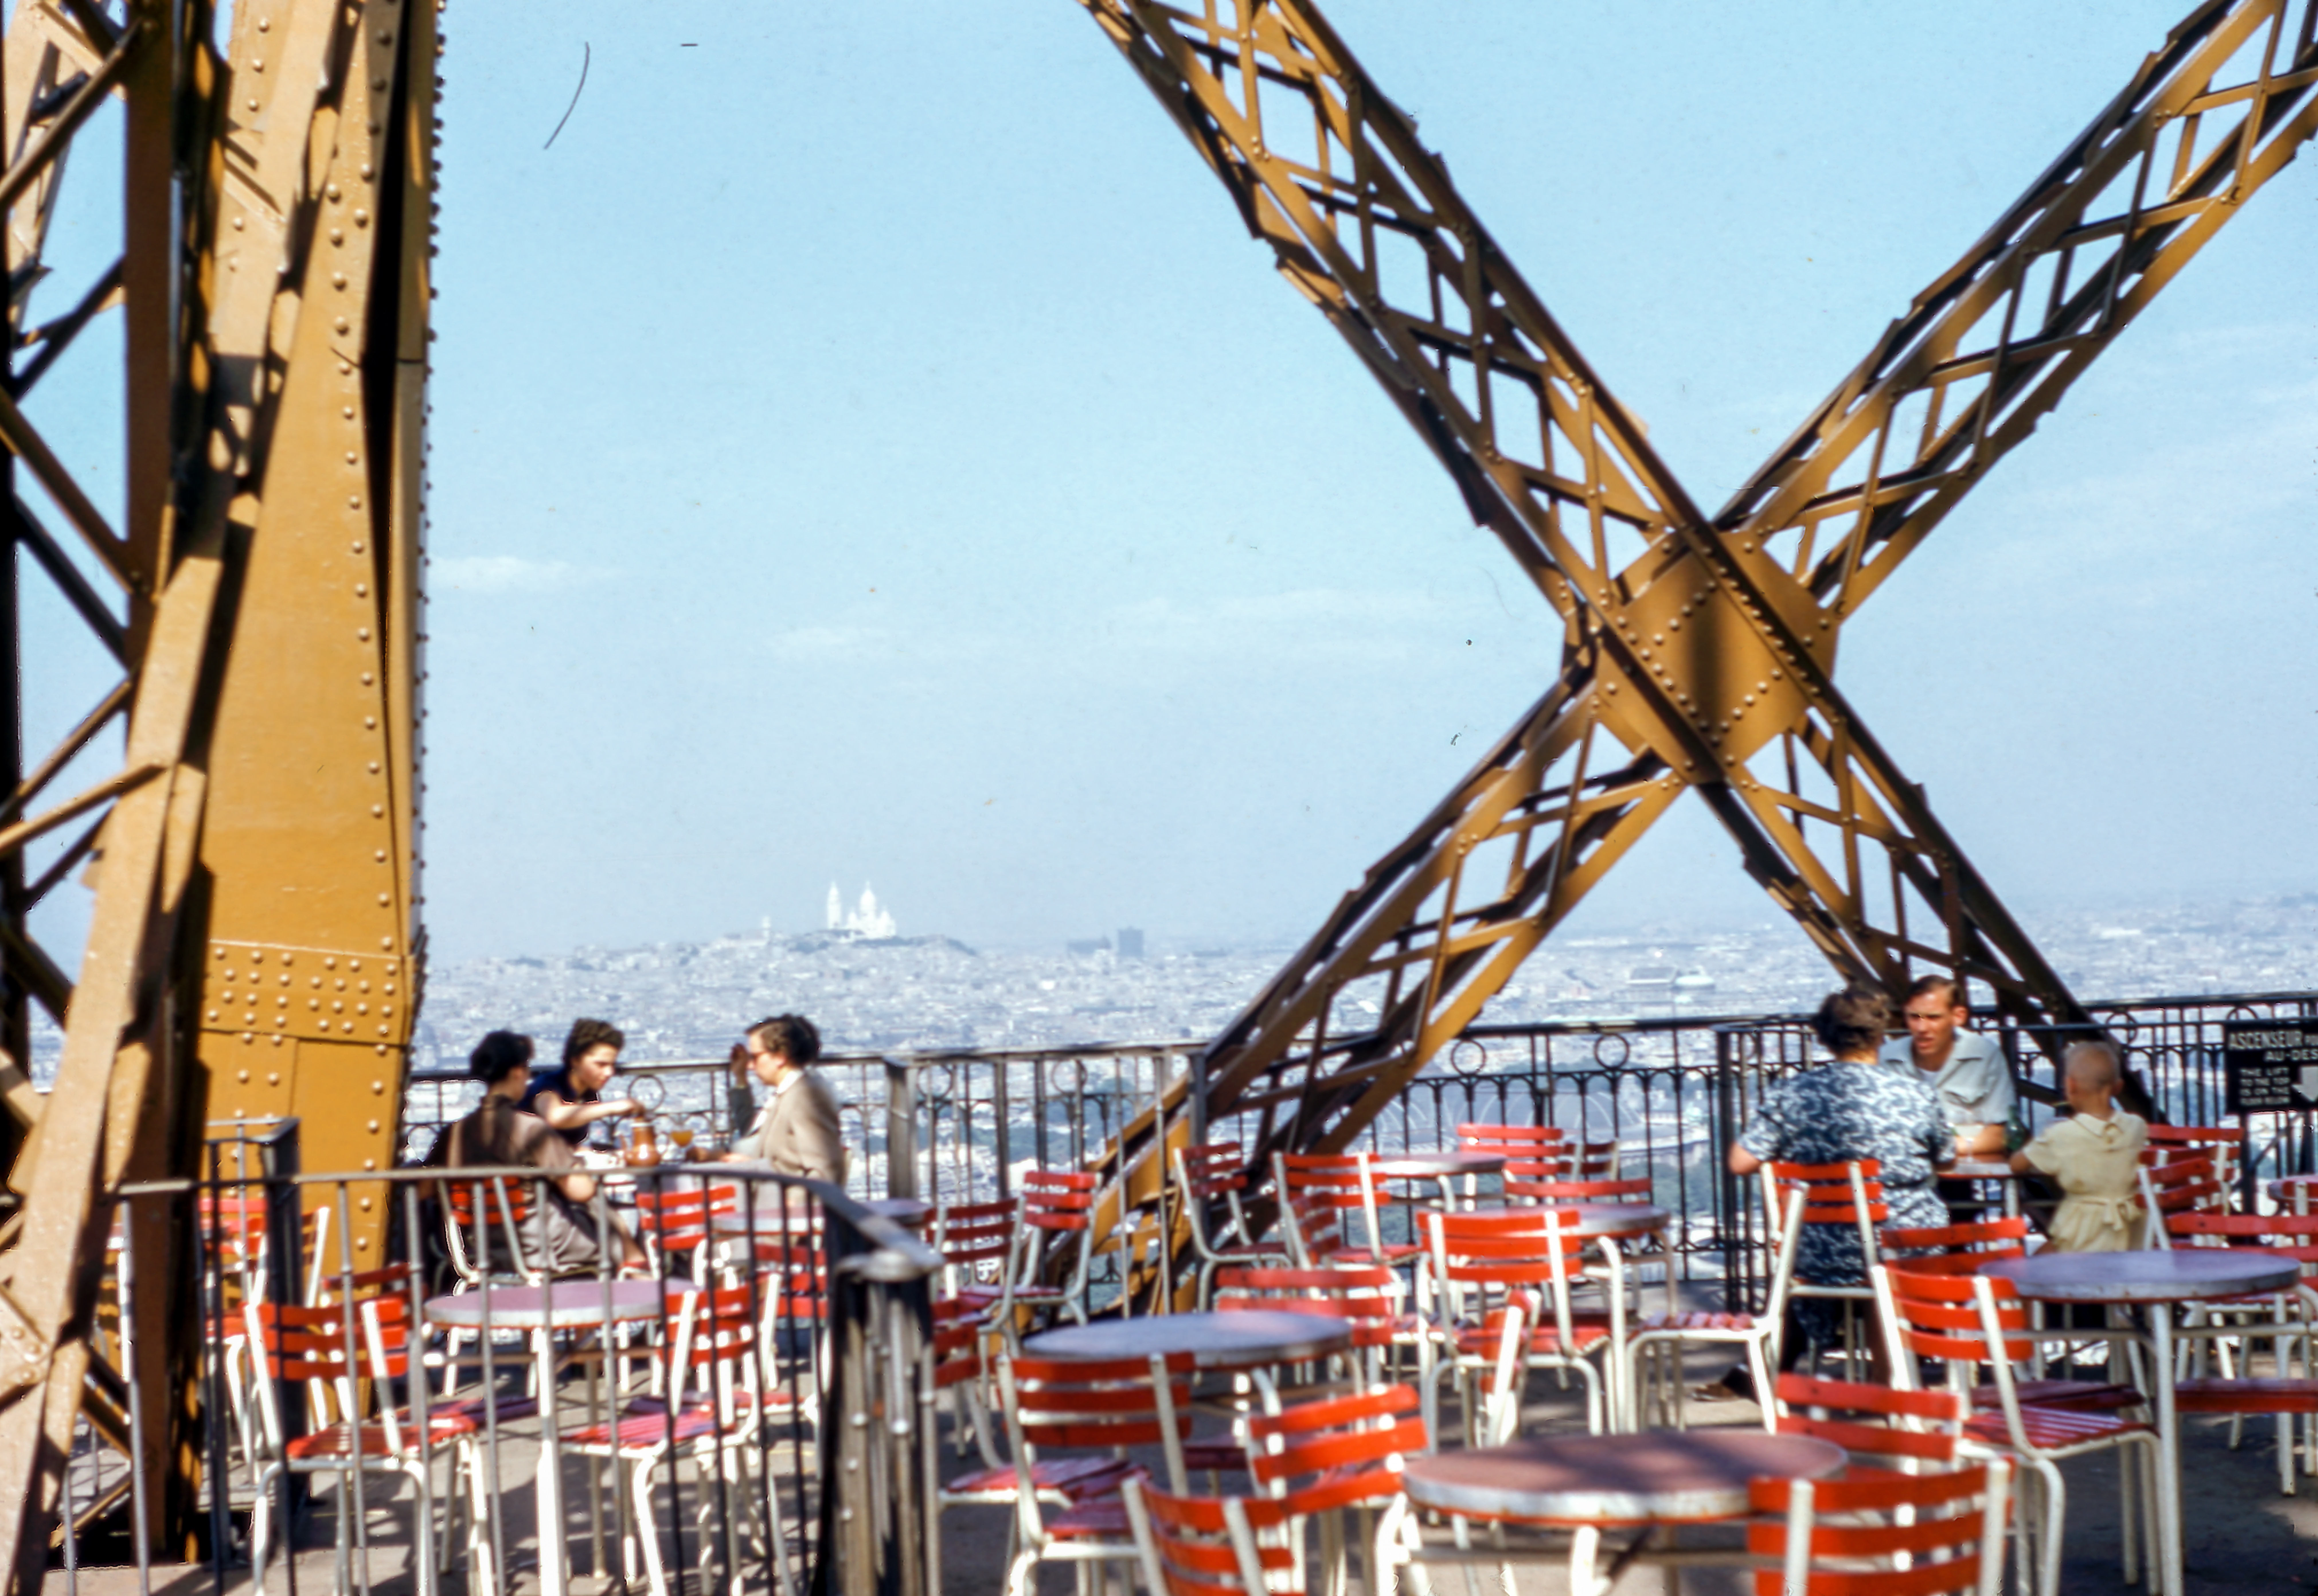 7 Things Only Tourists do in French Restaurants